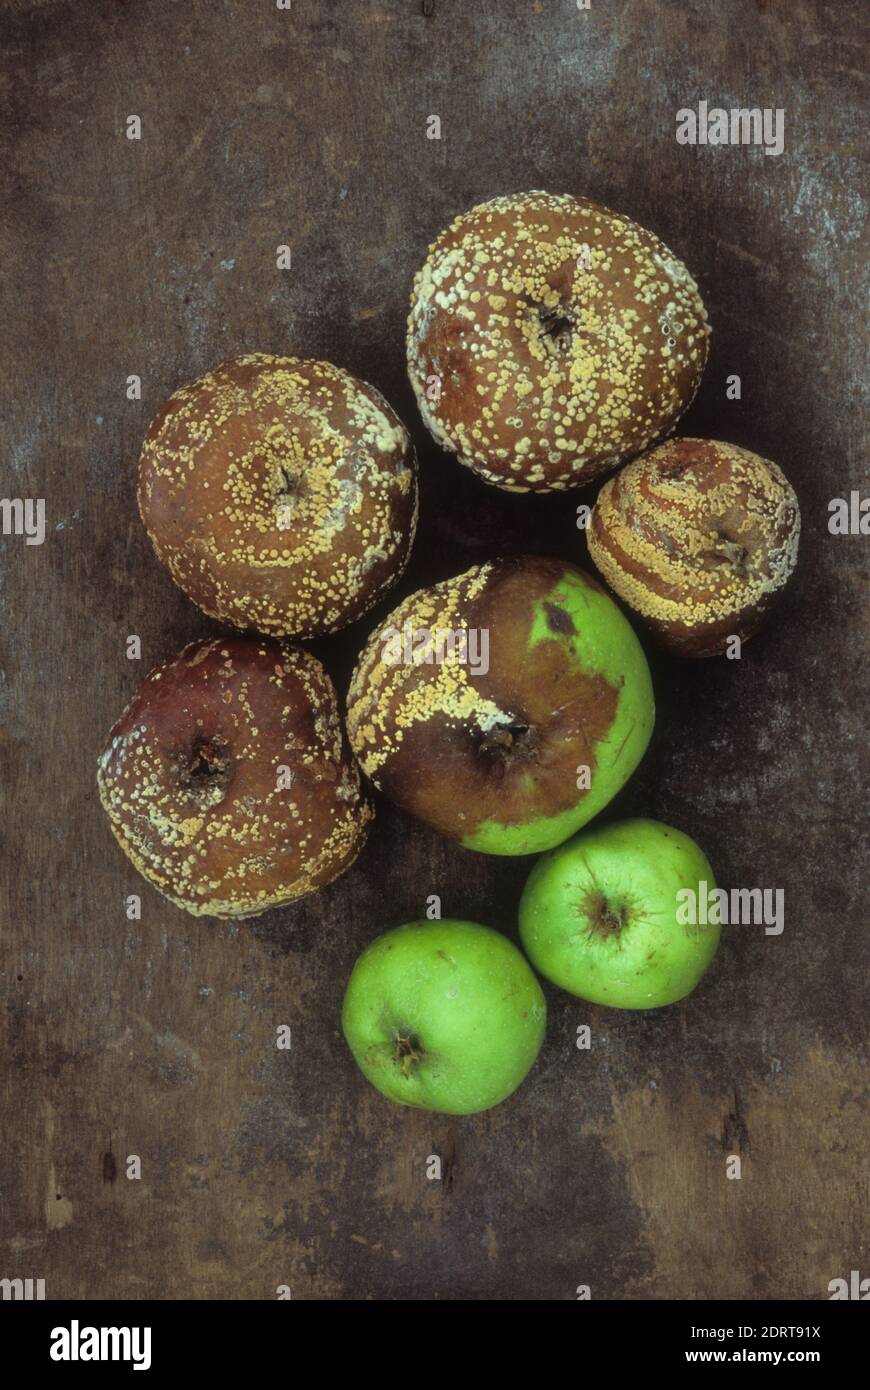 Seven large and small Bramley cooking apples turning from green to brown and mouldy Stock Photo